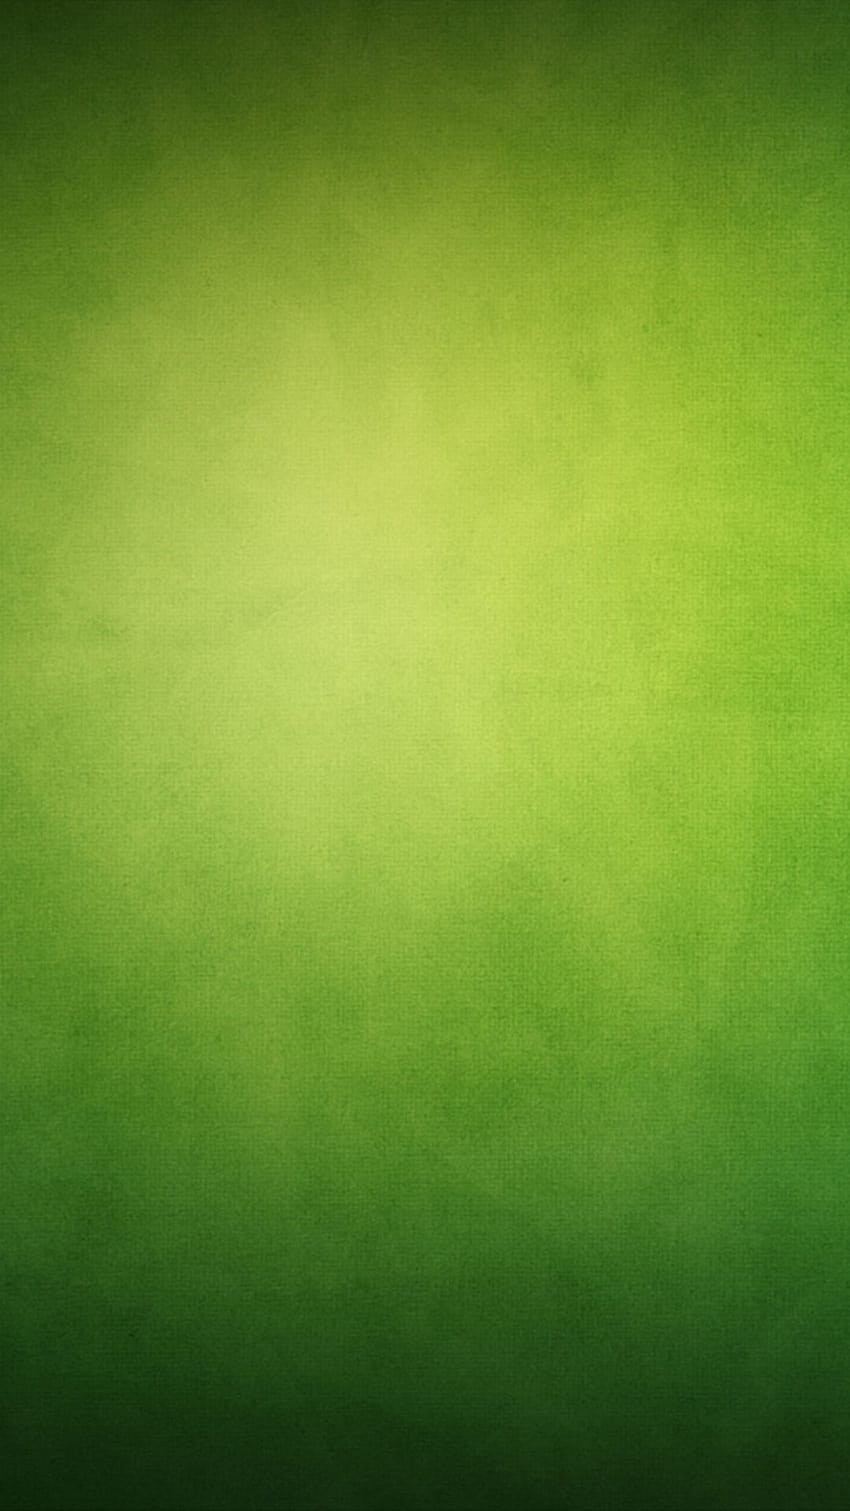 Pure Minimal Simple Green Backgrounds Iphone 7, pure iphone HD phone wallpaper